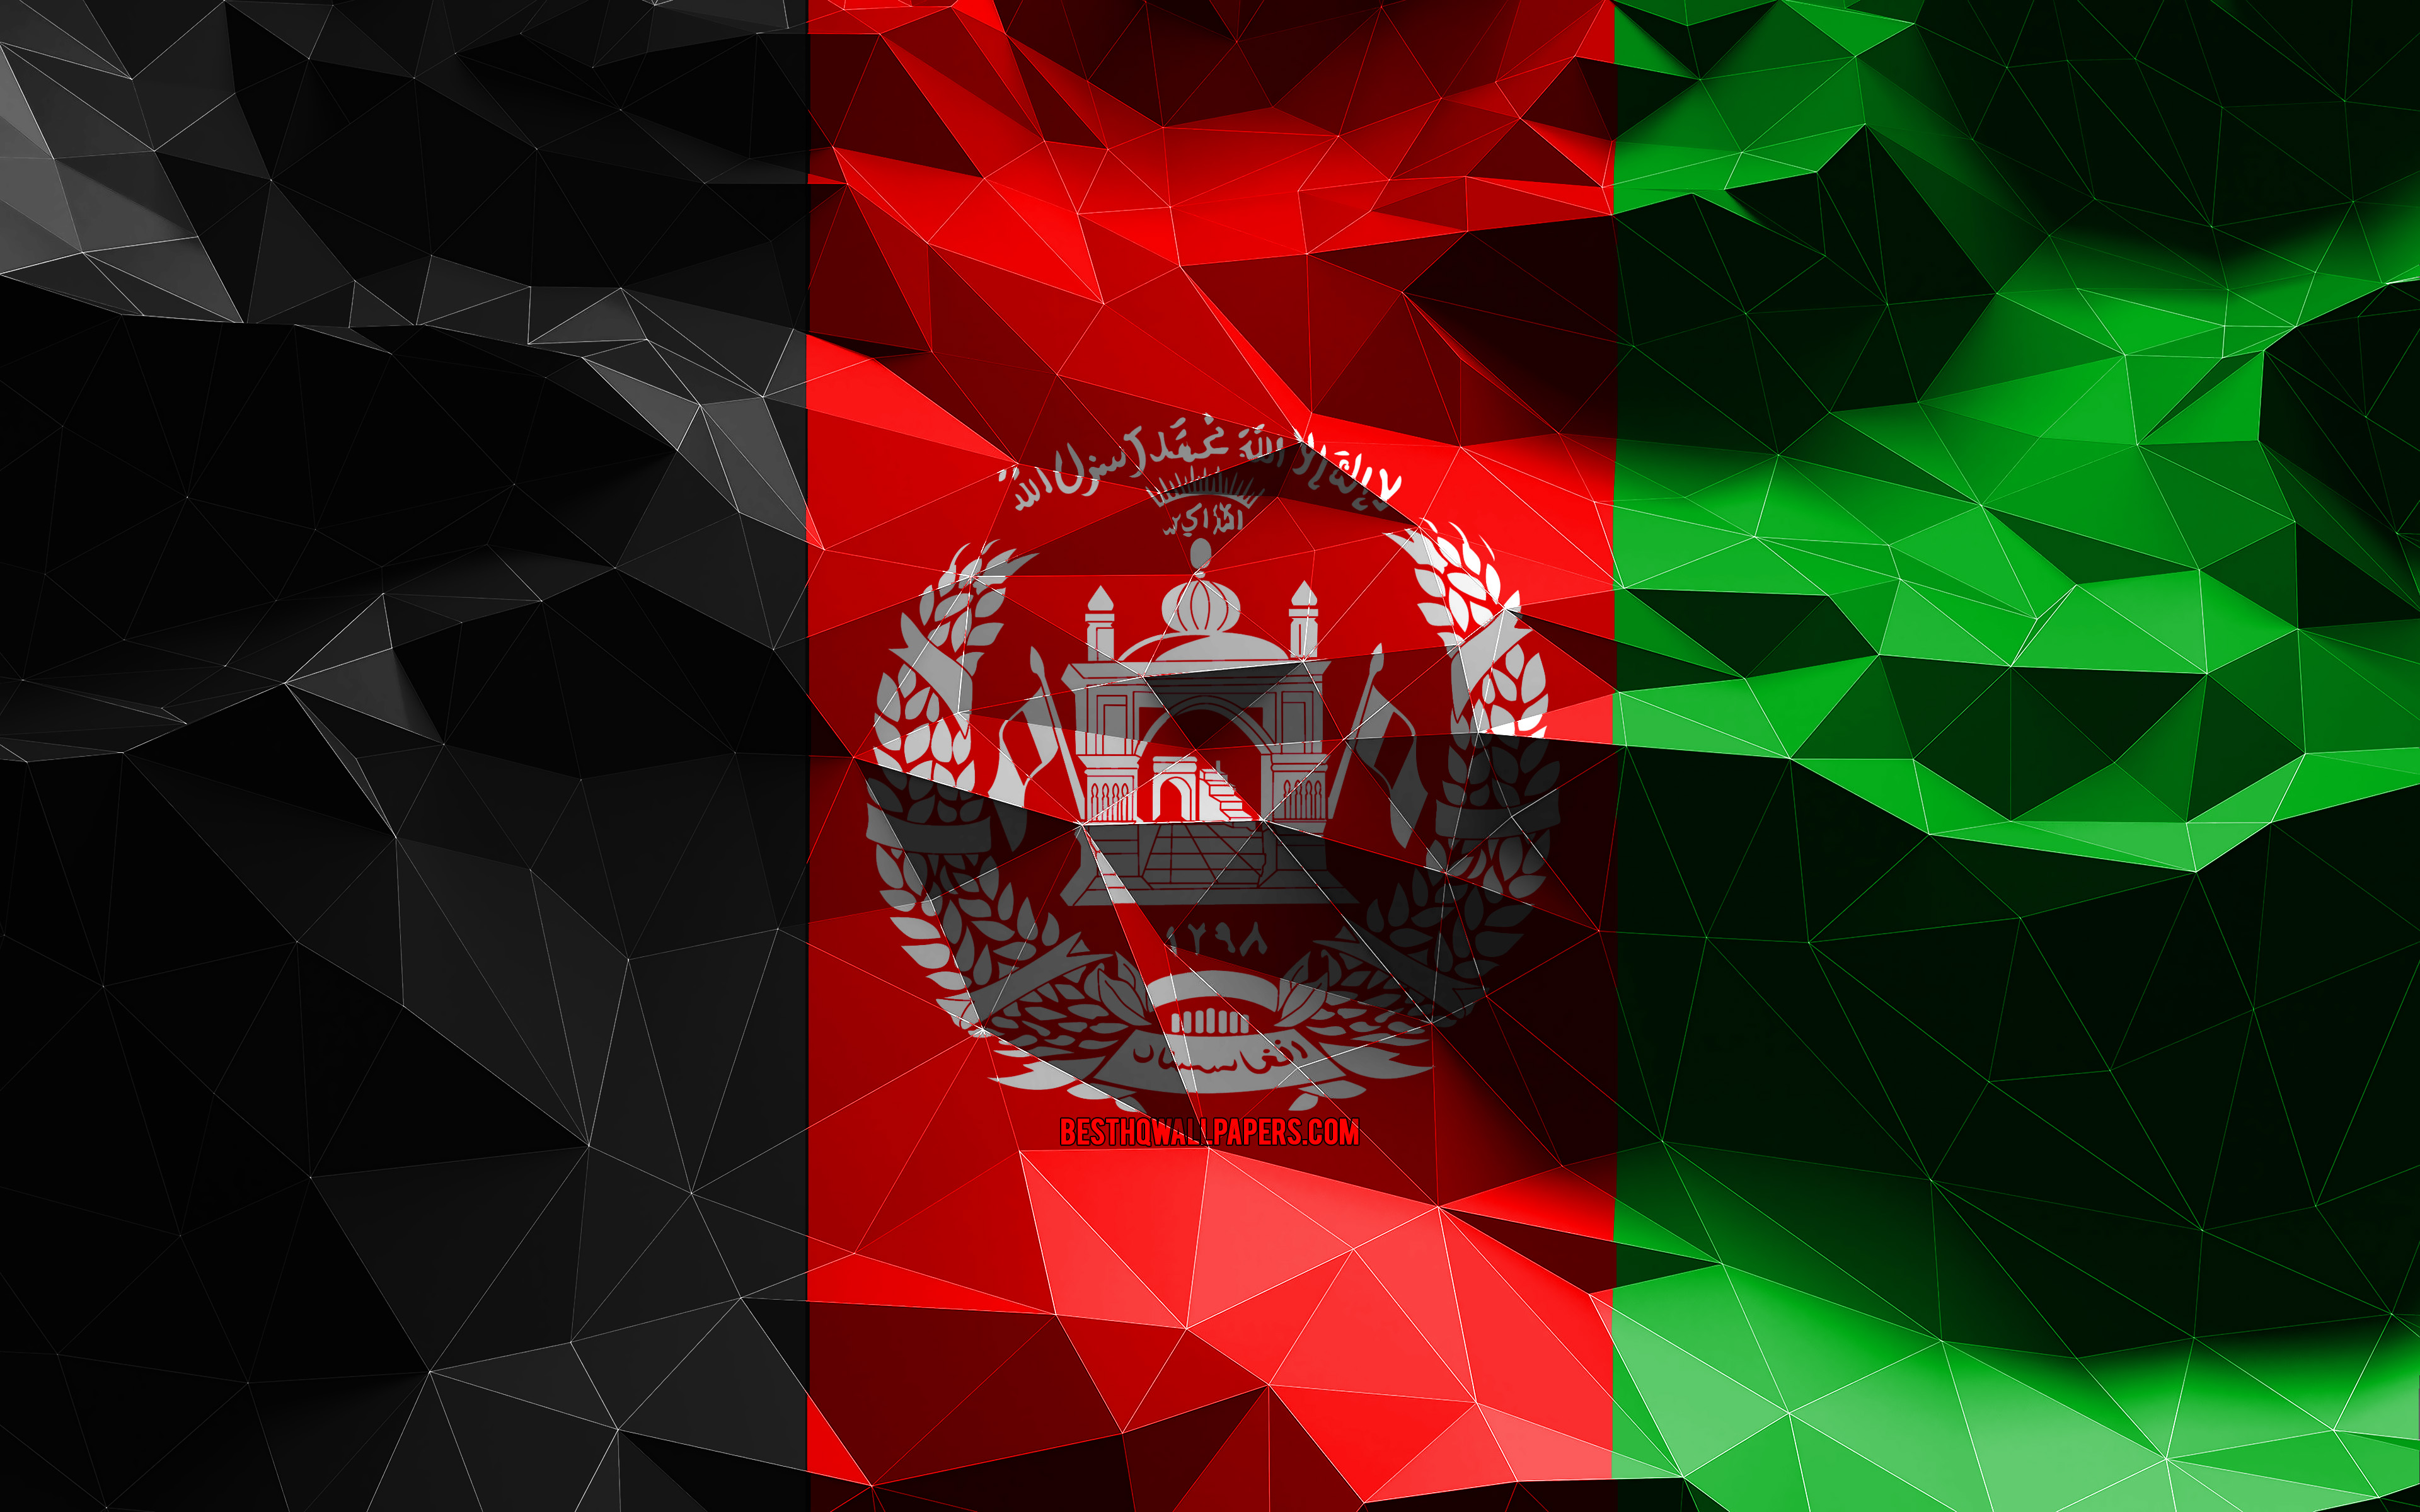 Download wallpaper 4k, Afghan flag, low poly art, Asian countries, national symbols, Flag of Afghanistan, 3D art, Afghanistan, Asia, Afghanistan 3D flag, Afghanistan flag for desktop with resolution 3840x2400. High Quality HD